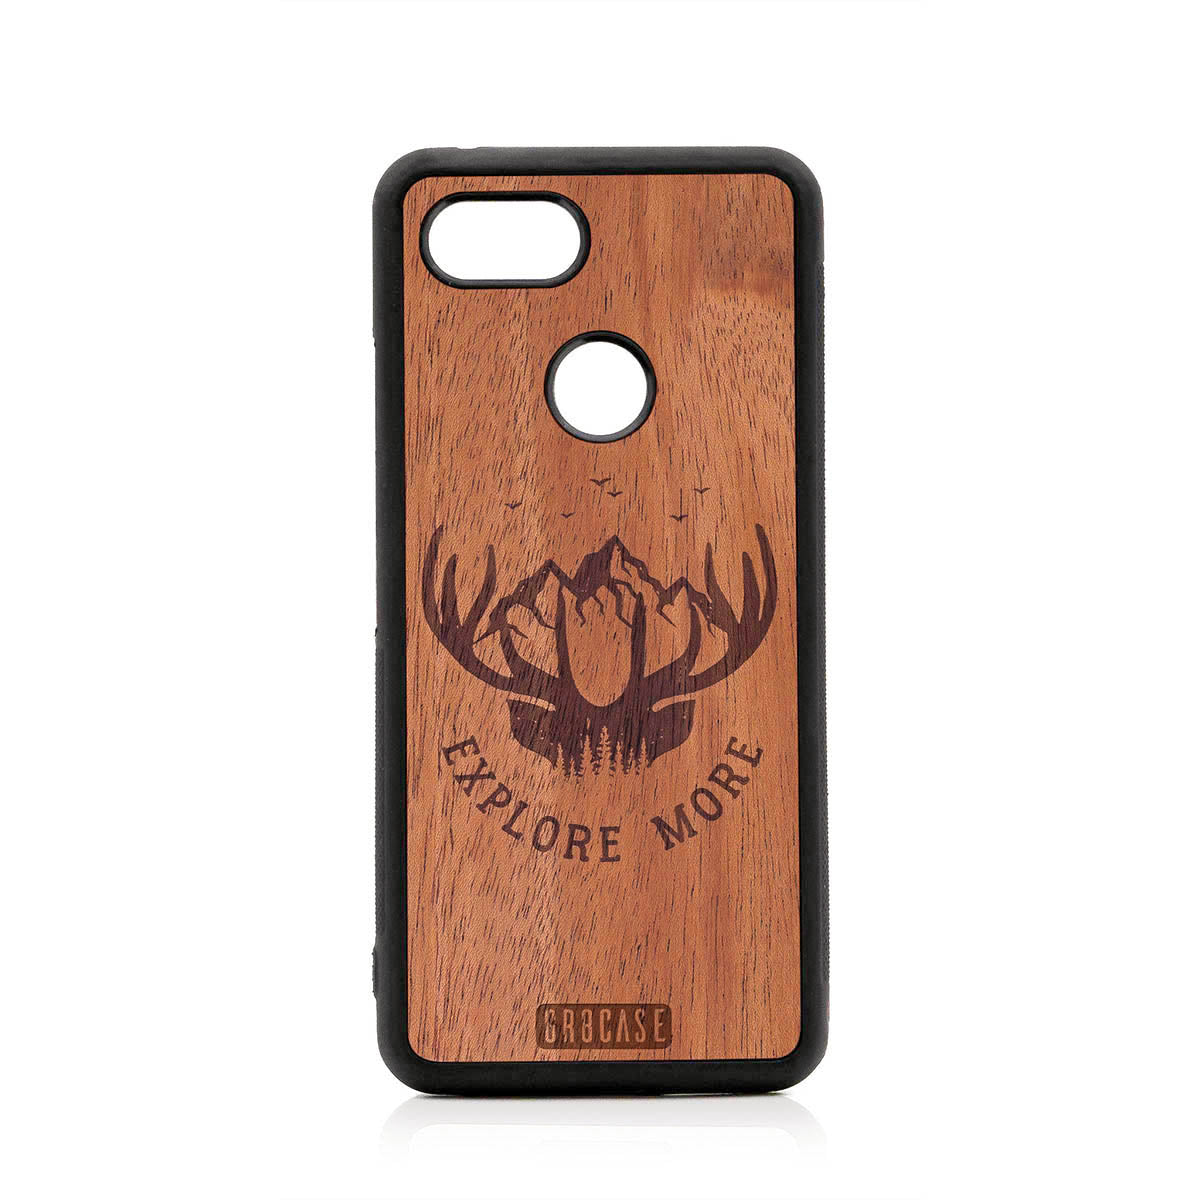 Explore More (Forest, Mountains & Antlers) Design Wood Case For Google Pixel 3 by GR8CASE